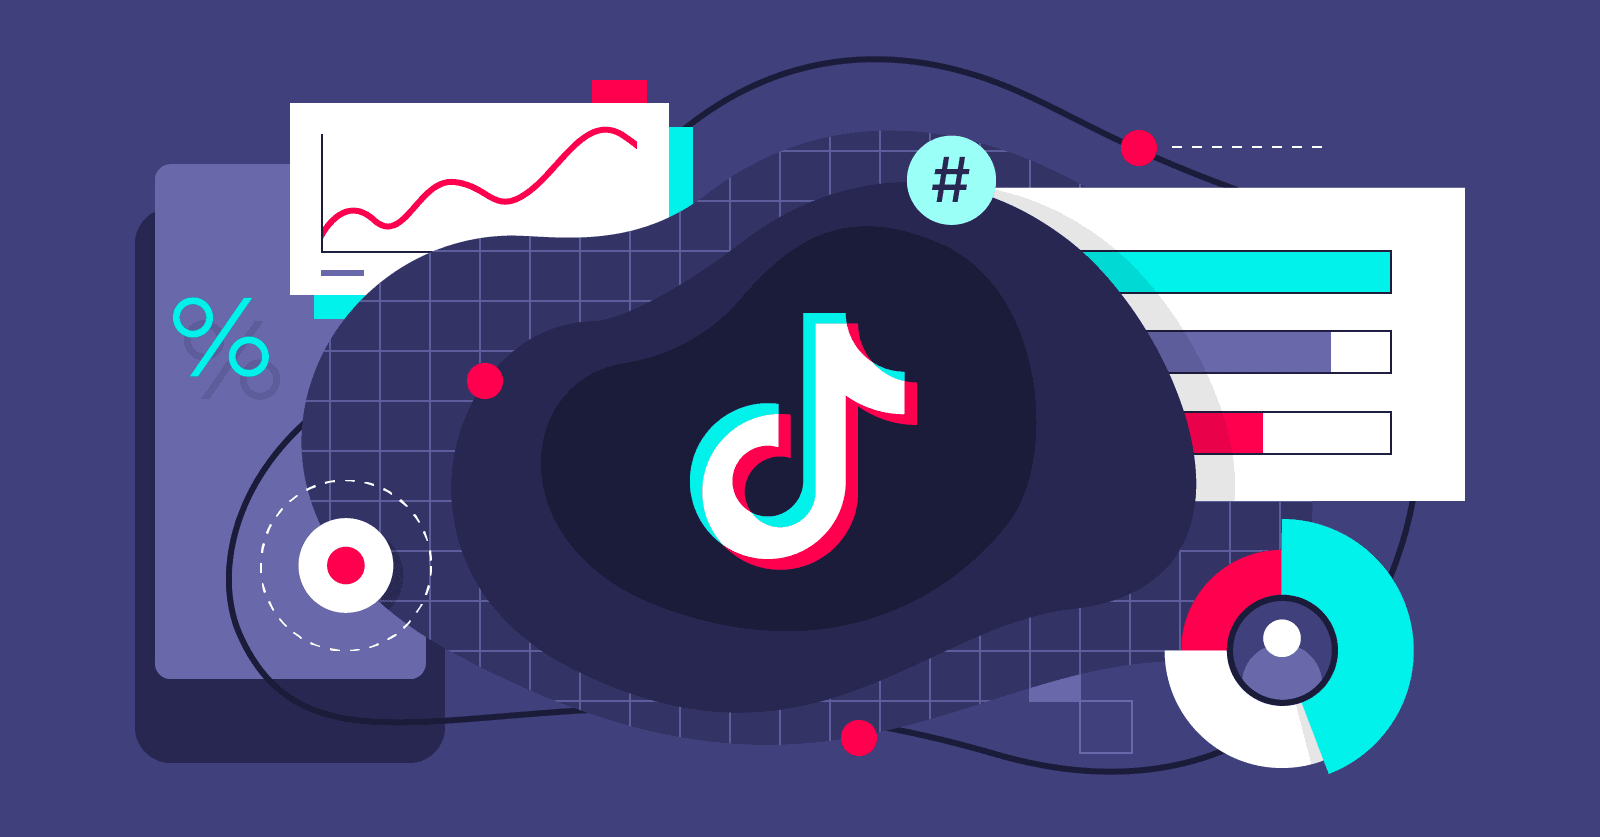 Stylized TikTok logo surrounded by various graphic elements representing analytics, data, and online interaction.